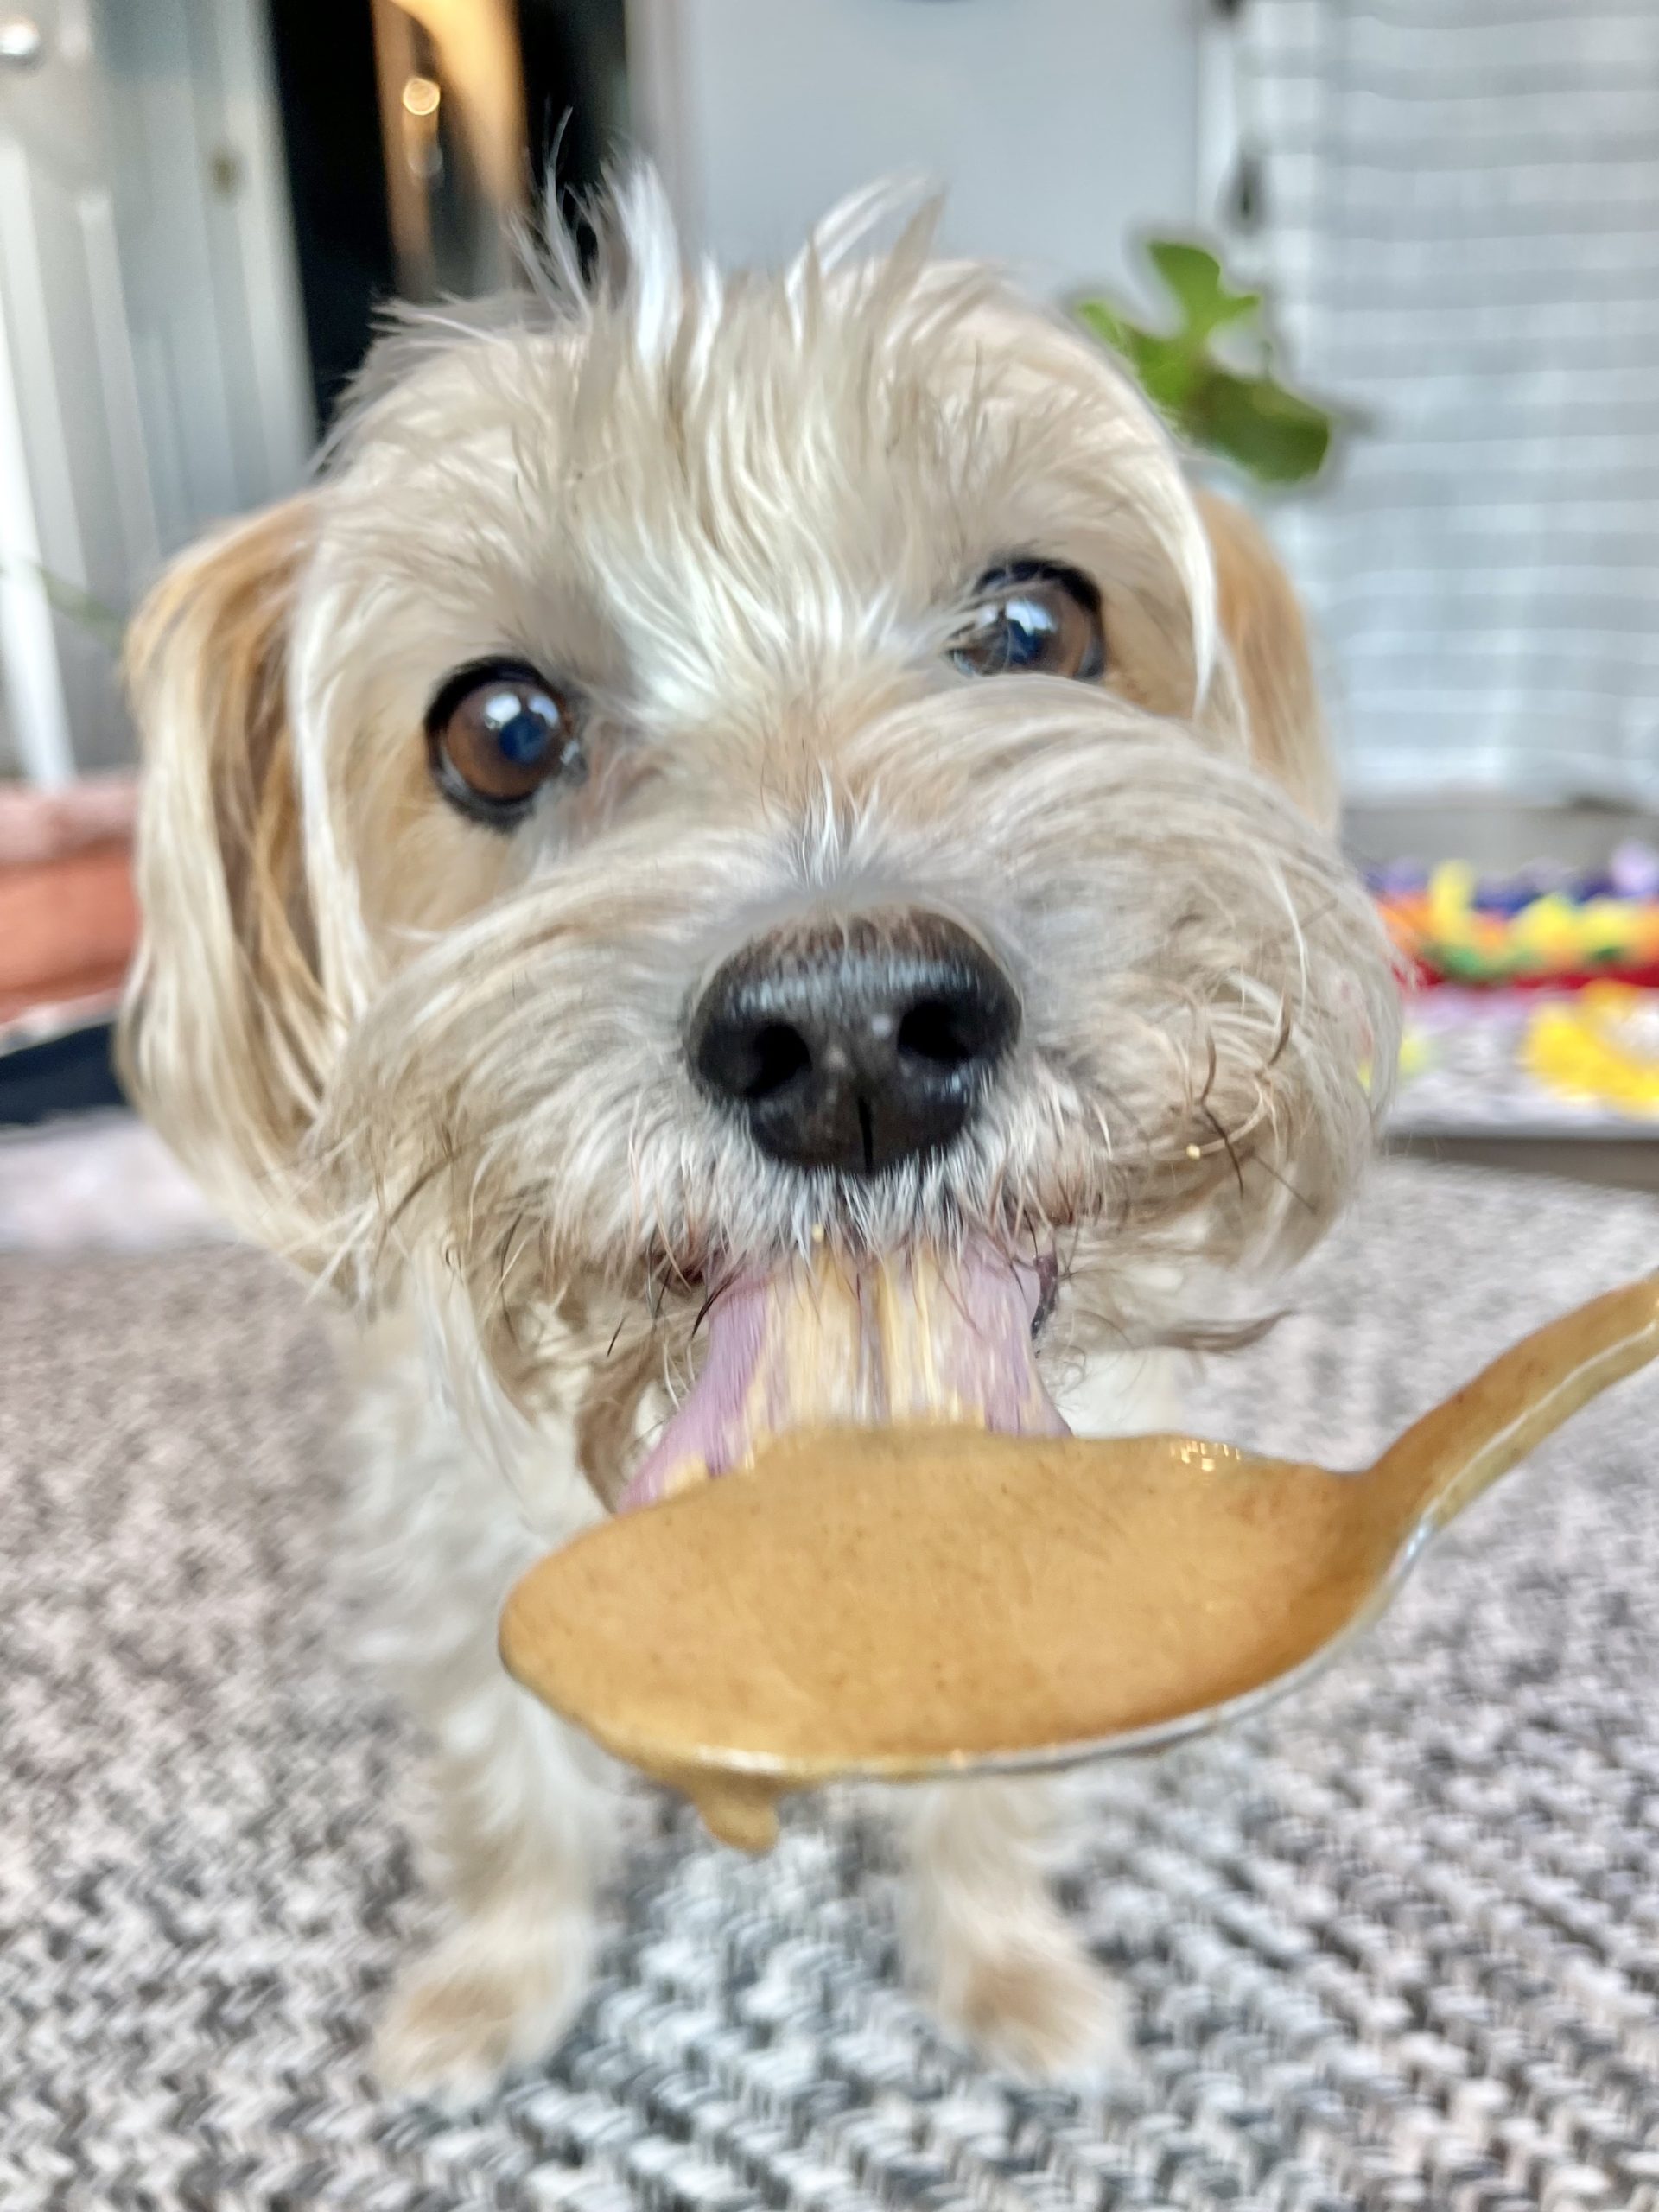 Can Puppies Have Skippy Peanut Butter? Discover the Safe and Delicious Options for Your Furry Friend